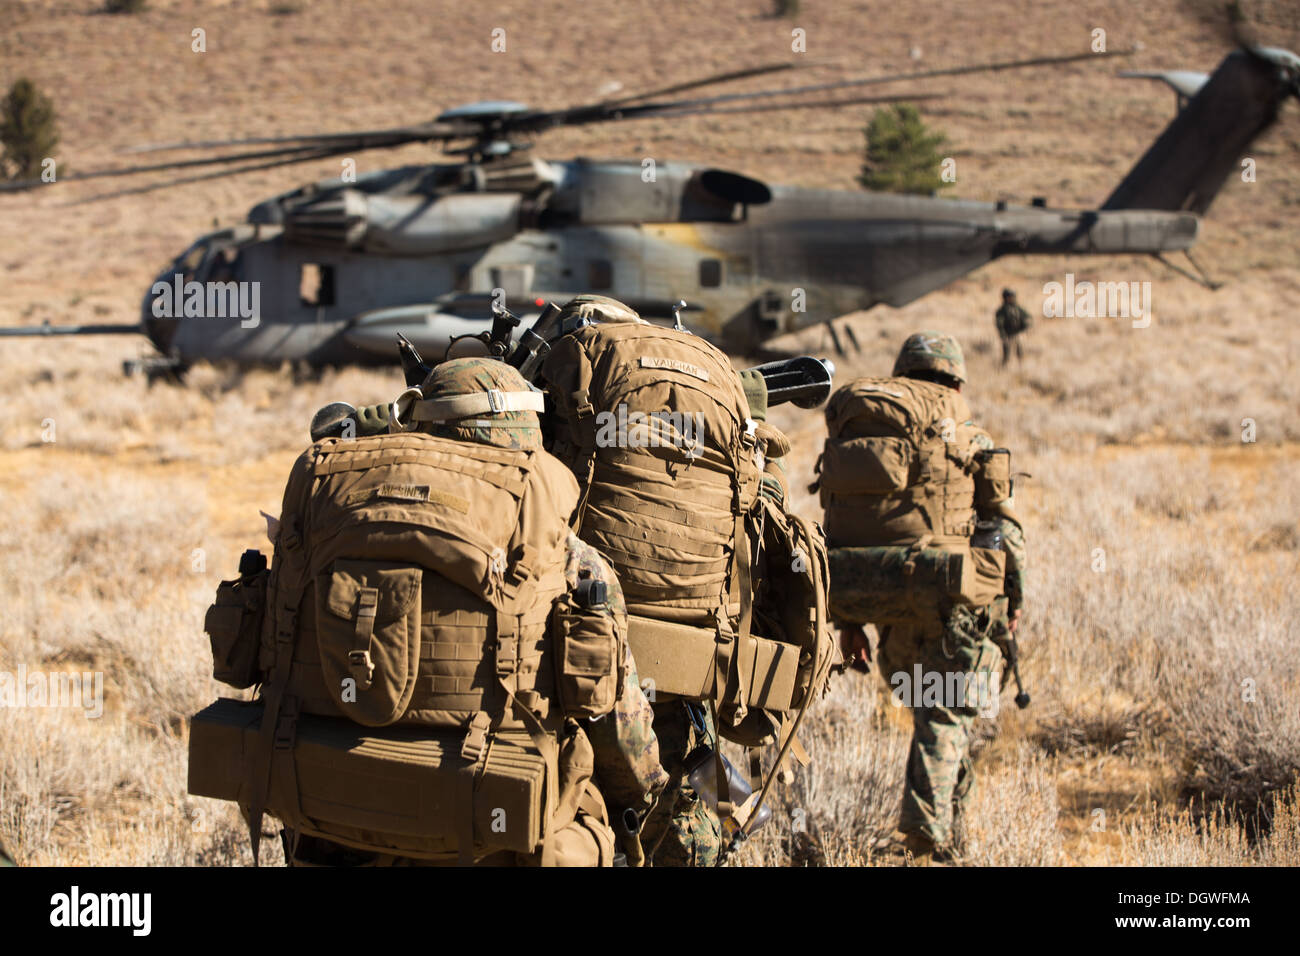 U.S. Marines from 1st Battalion, 5th Marine Regiment (1/5), 1st Marine Division from Camp Pendleton, Calif. board a CH-53E Super Stock Photo